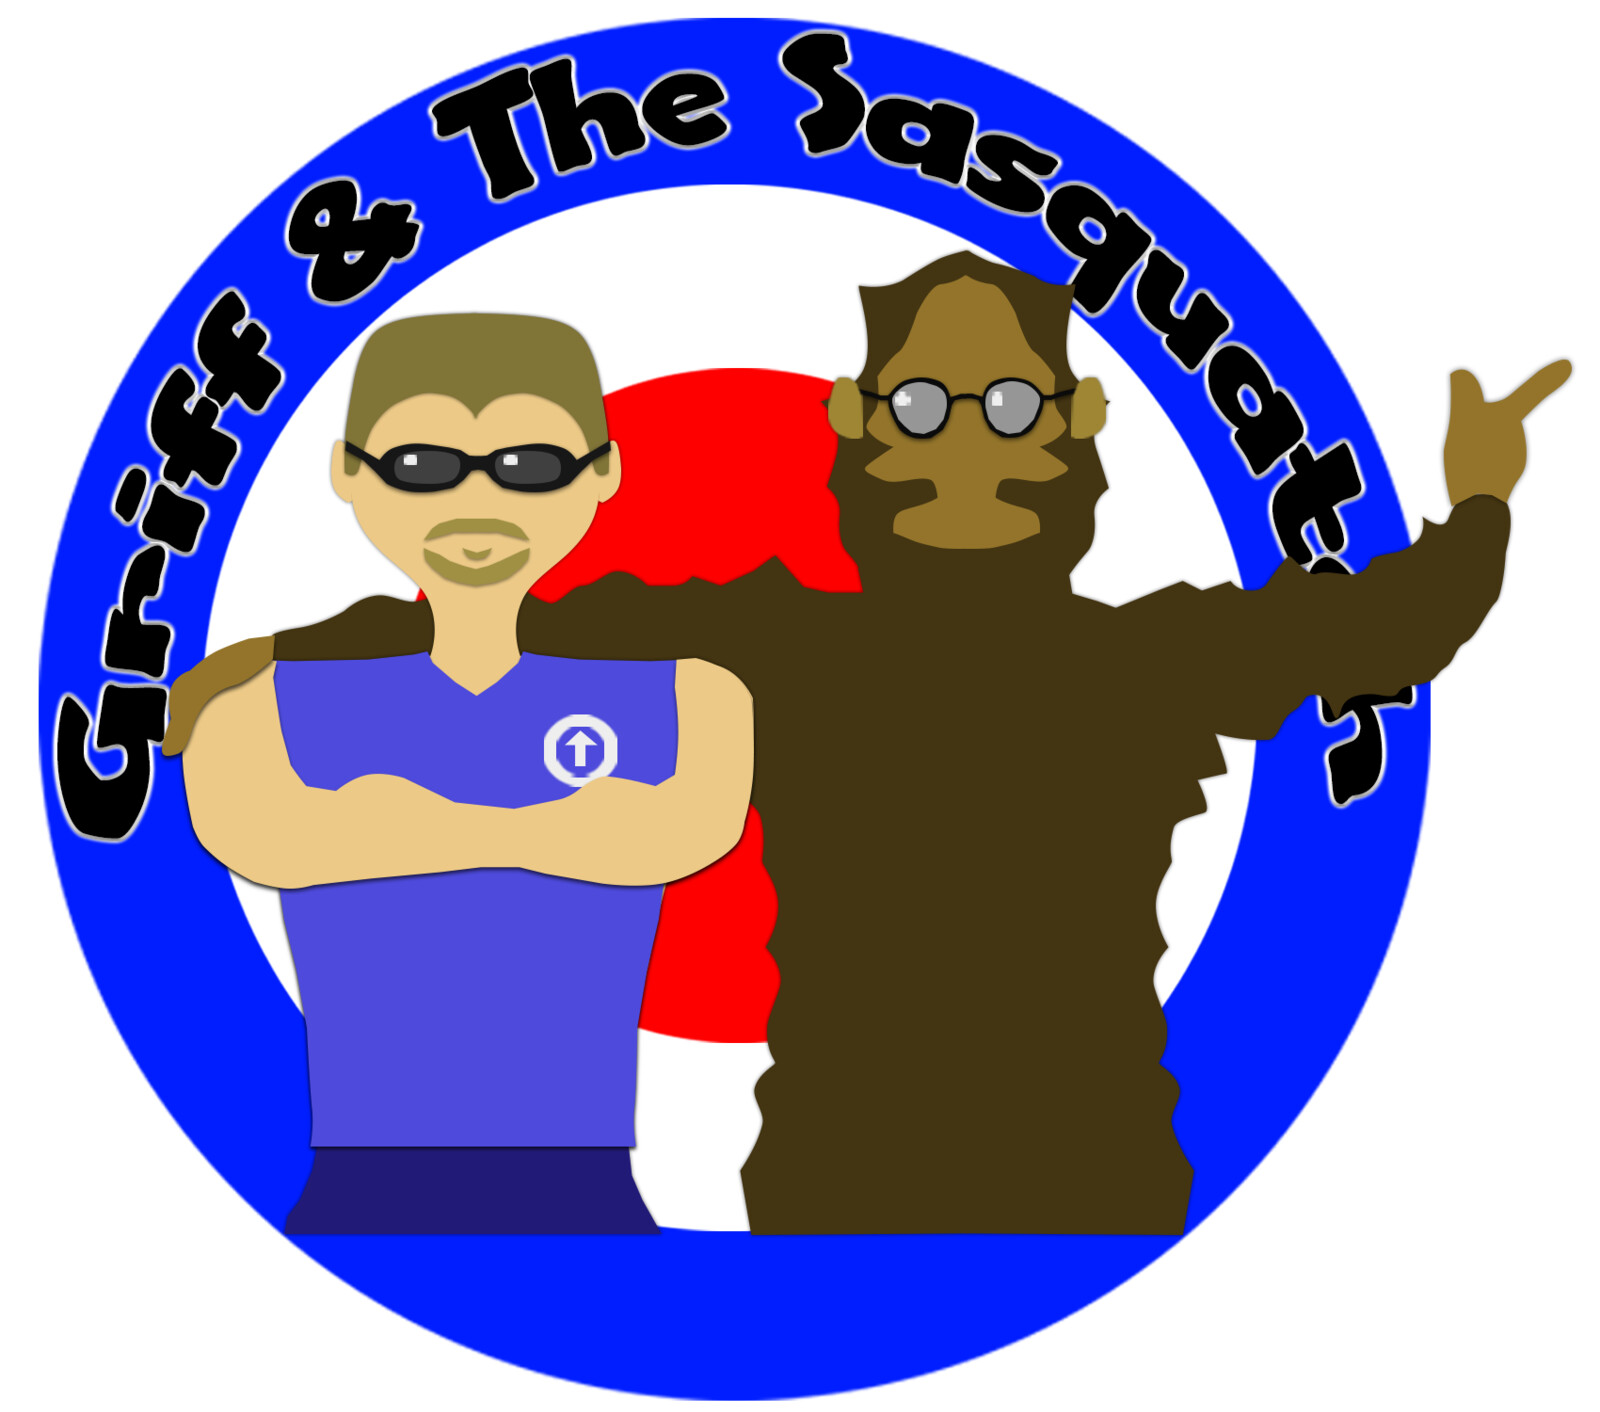 The second iteration of the logo for Griff &amp; The Sasquatch YT channel